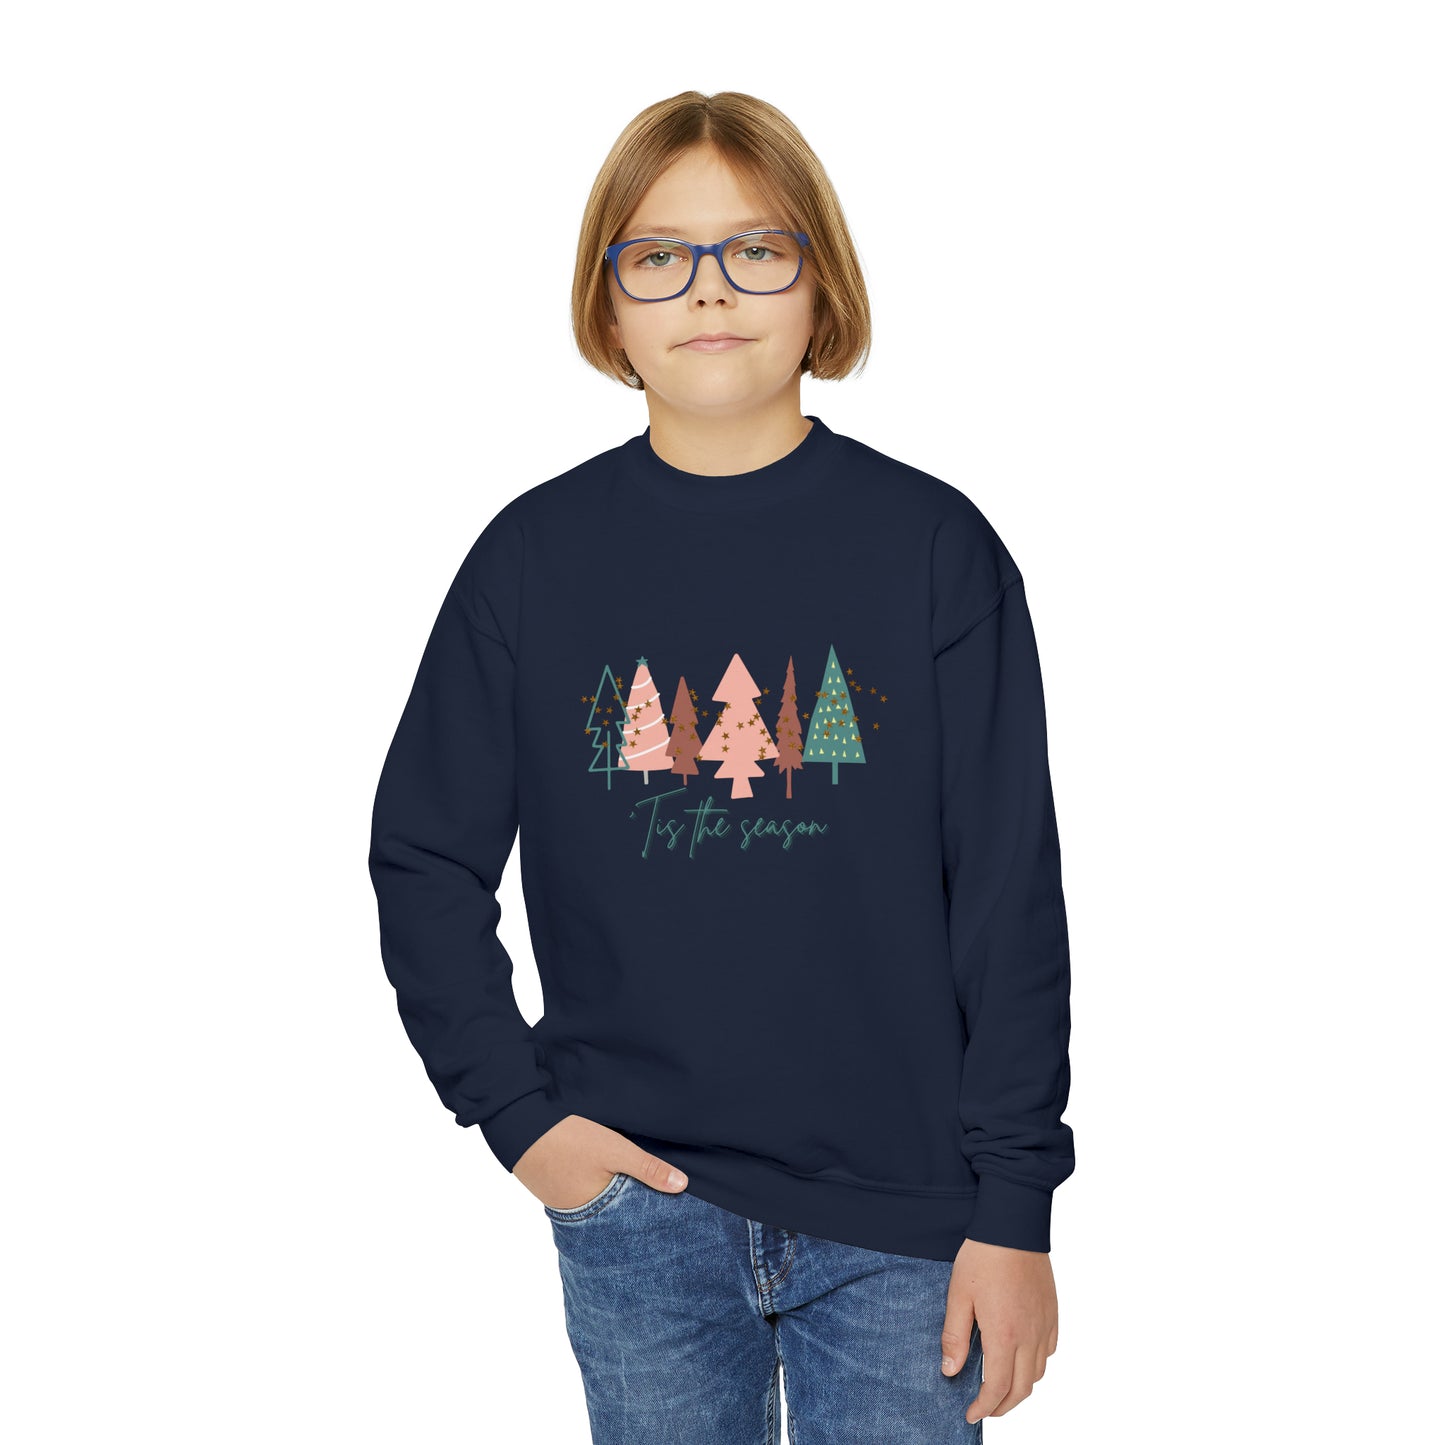 A young girl wearing a cozy Gildan Youth Sweatshirt with trees on it, perfect for the winter months by Printify.